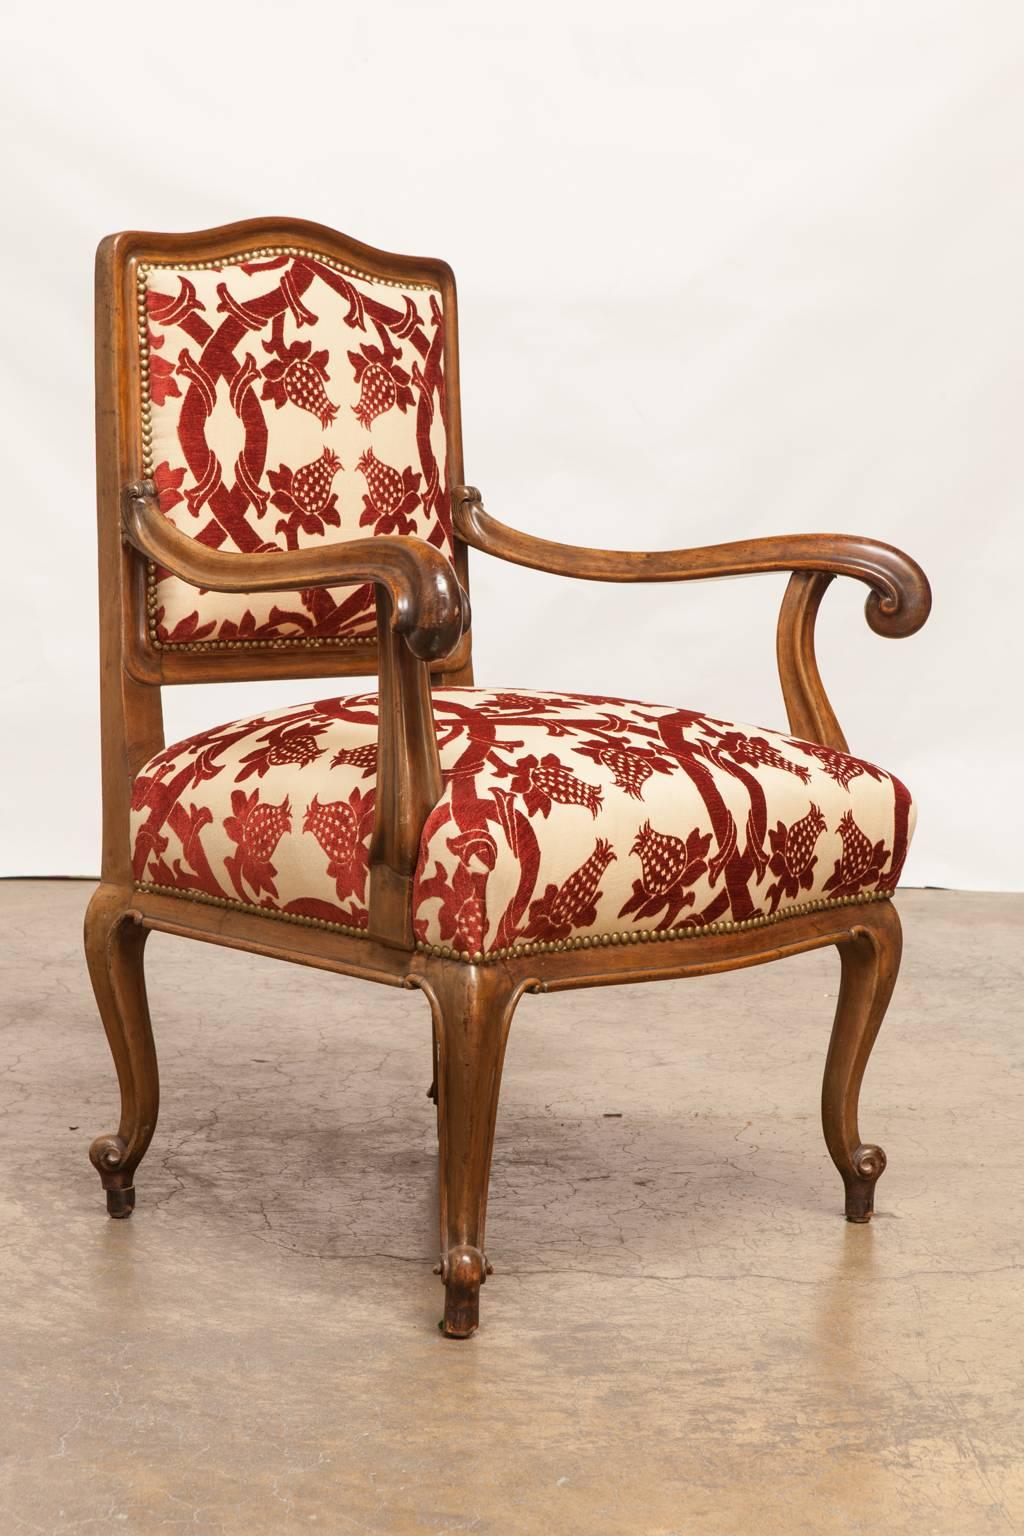 Unique carved Rococo style armchair featuring long, graceful scrolled arms and a square back. Newly upholstered with a burgundy floral and vine pattern over a cream ground. Accented with brass nail head trim and supported by cabriole legs with